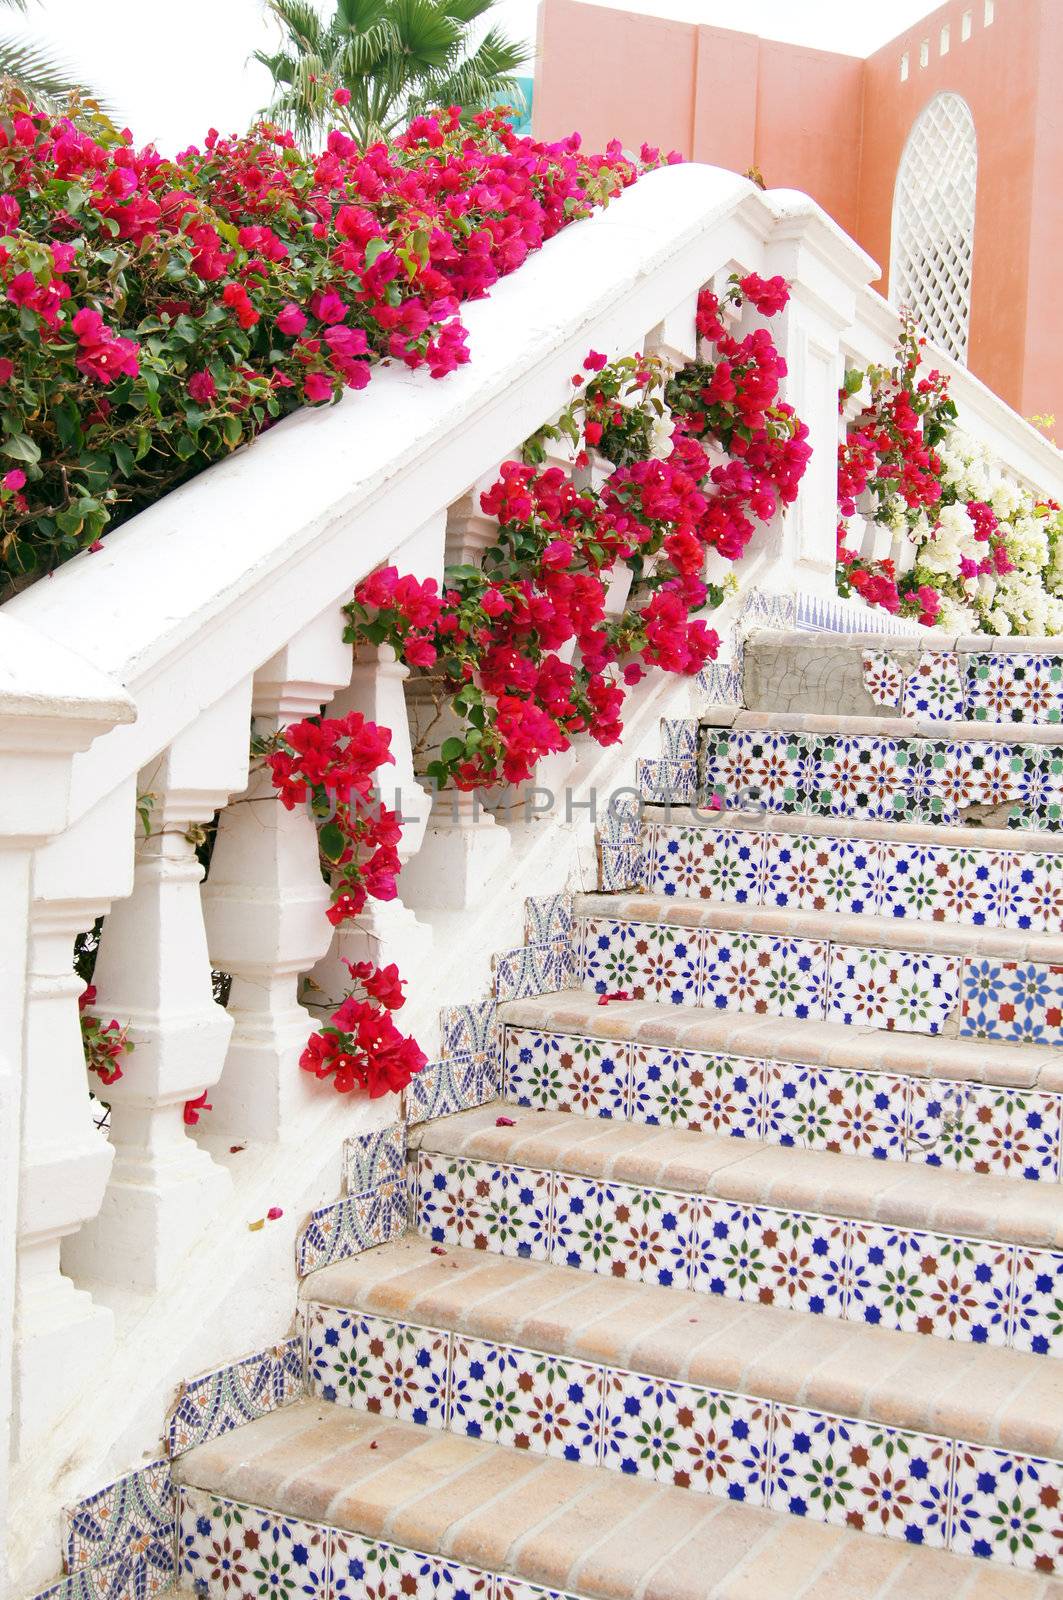 Blooming bougainvillea plant and ceramic riled stairs